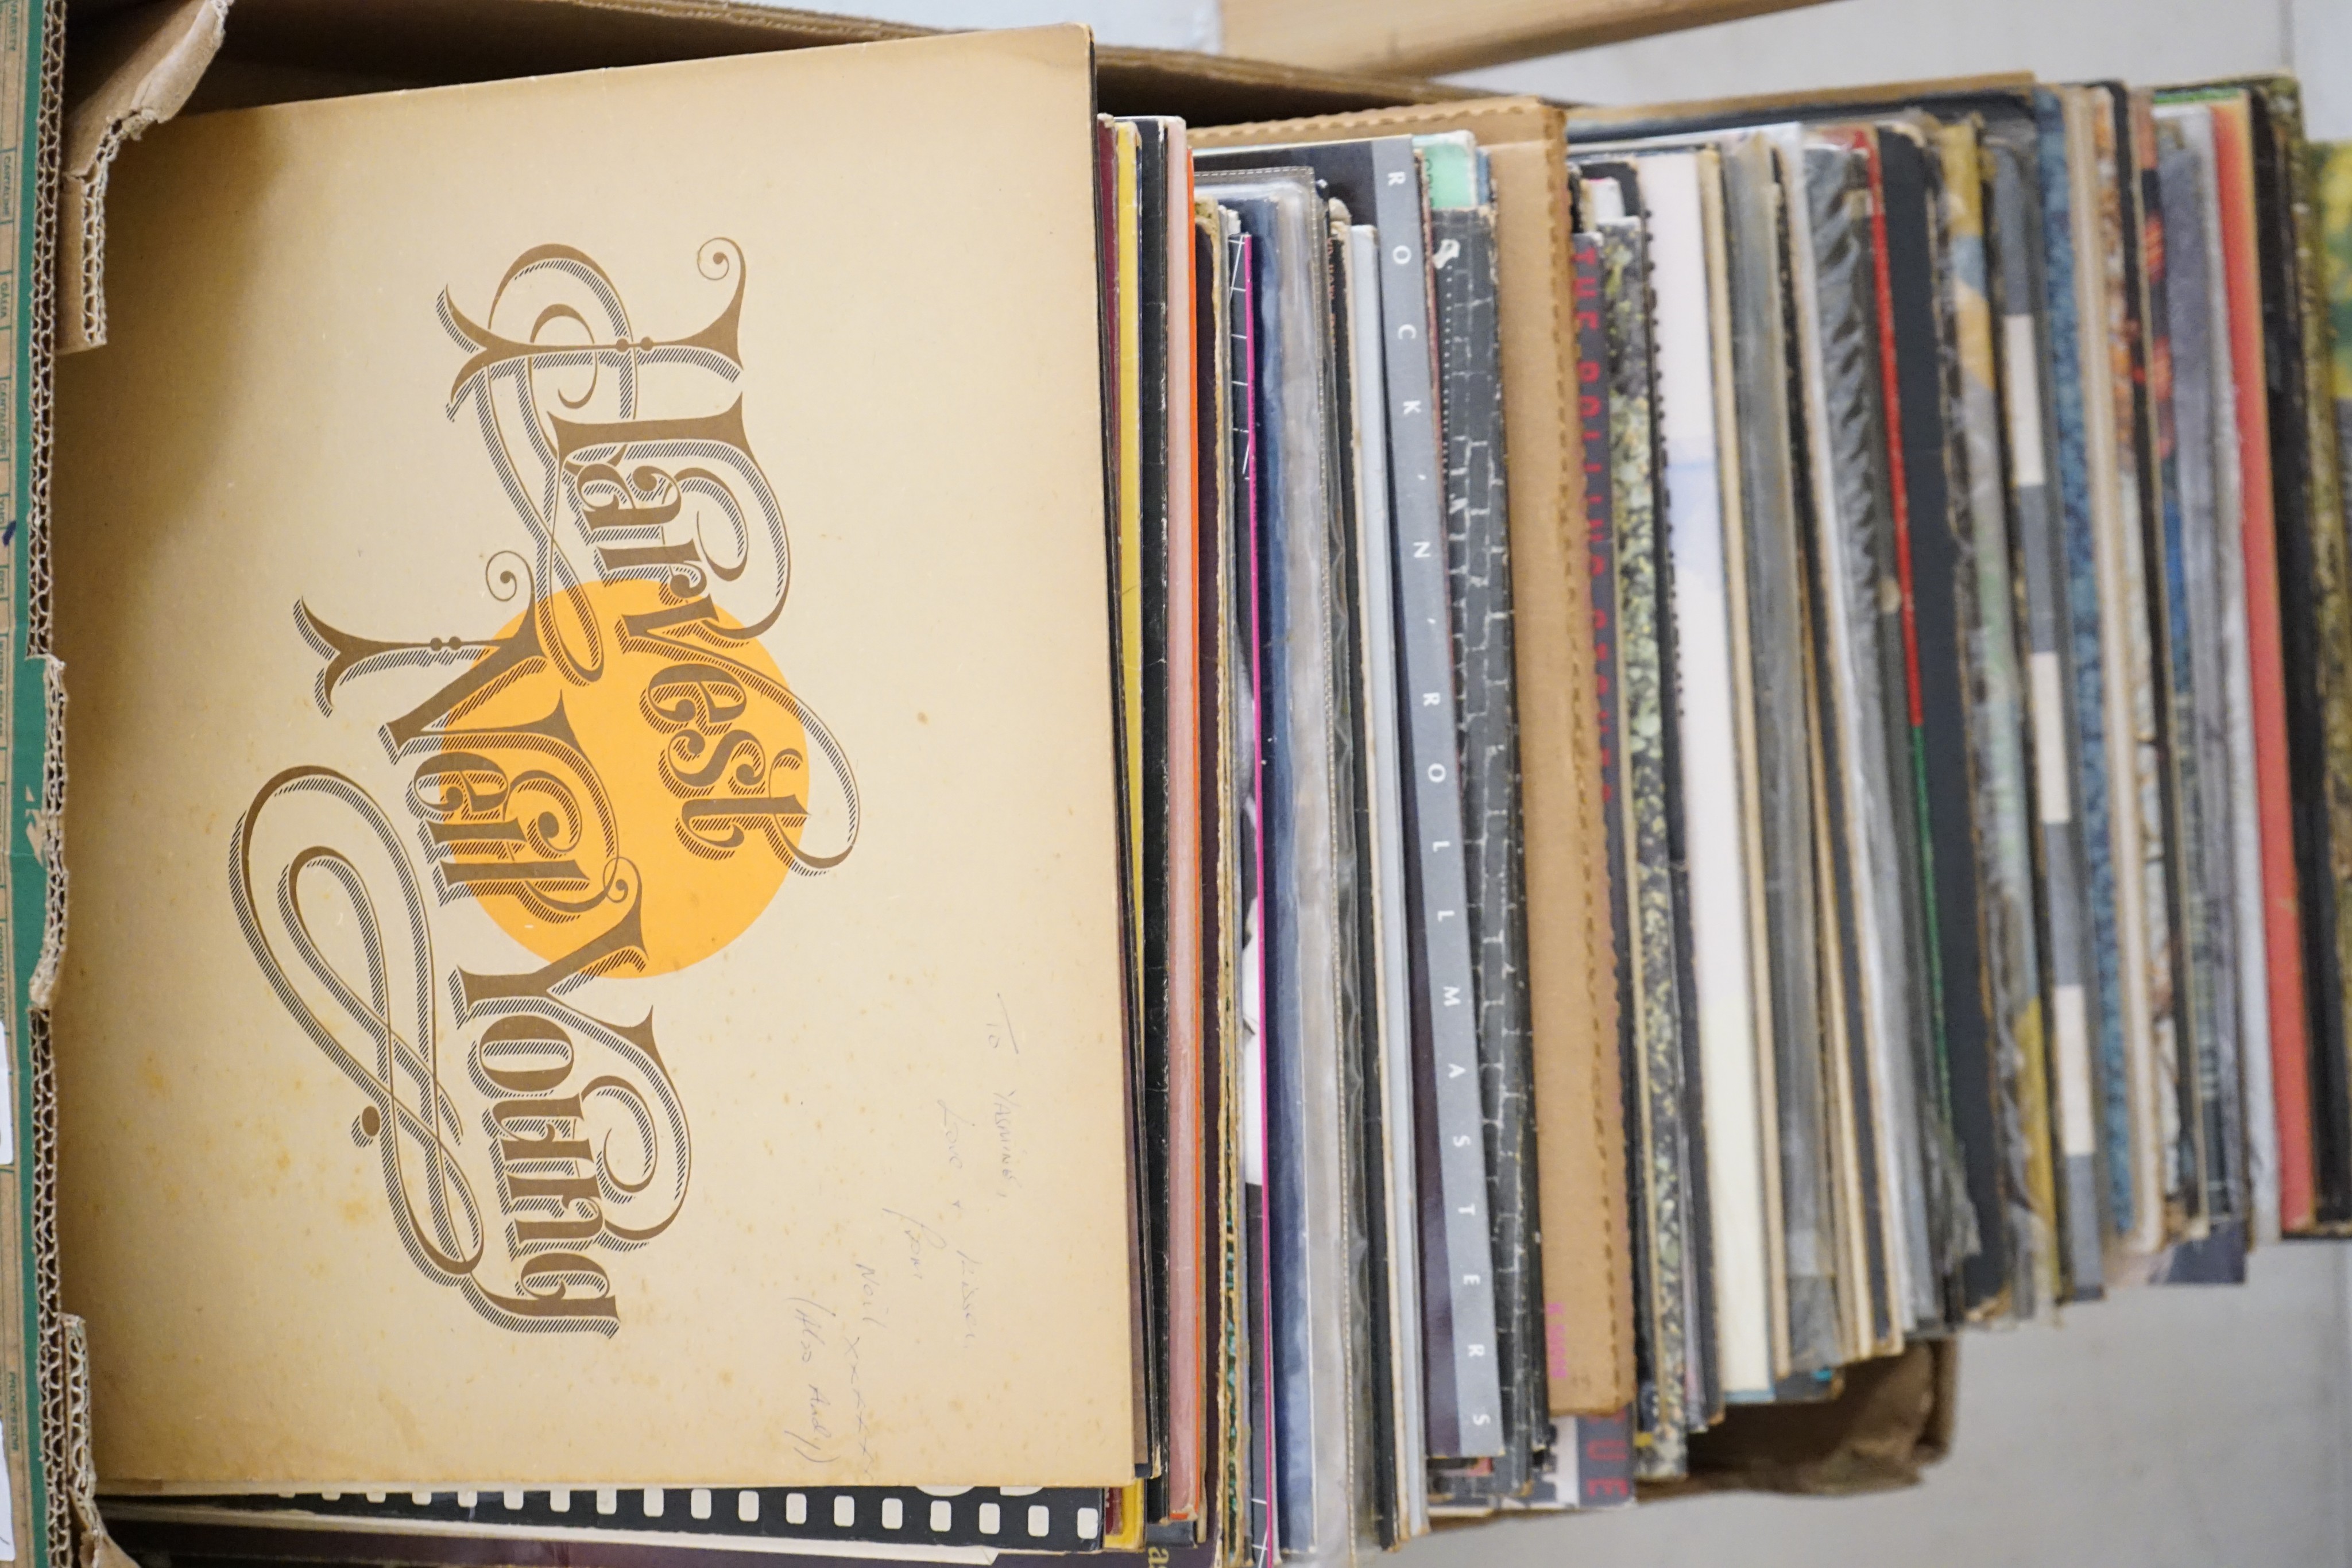 A quantity of various records including Neil Young, Creedence Clearwater, David Bowie, Fleetwood Mac, Eddie Cochran, Leonard Cohen, Alice Cooper, The Rolling Stones, Bob Dylan etc.